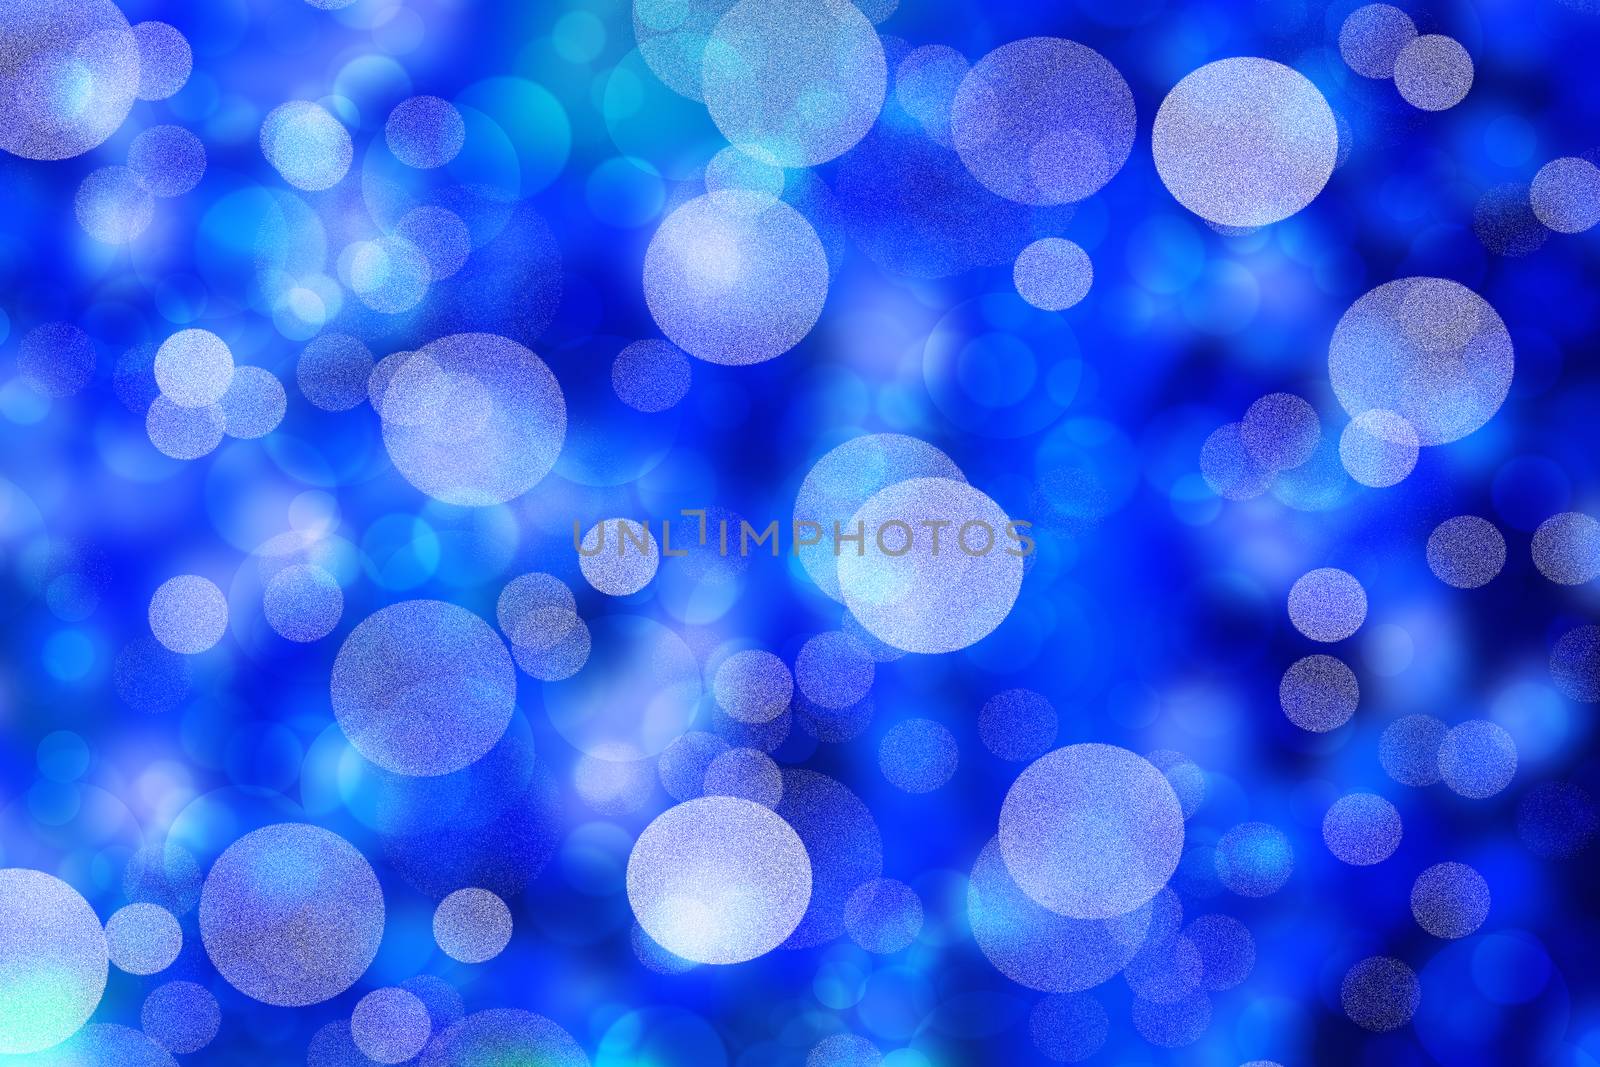 Beautiful blue bokeh abstract background, filter image